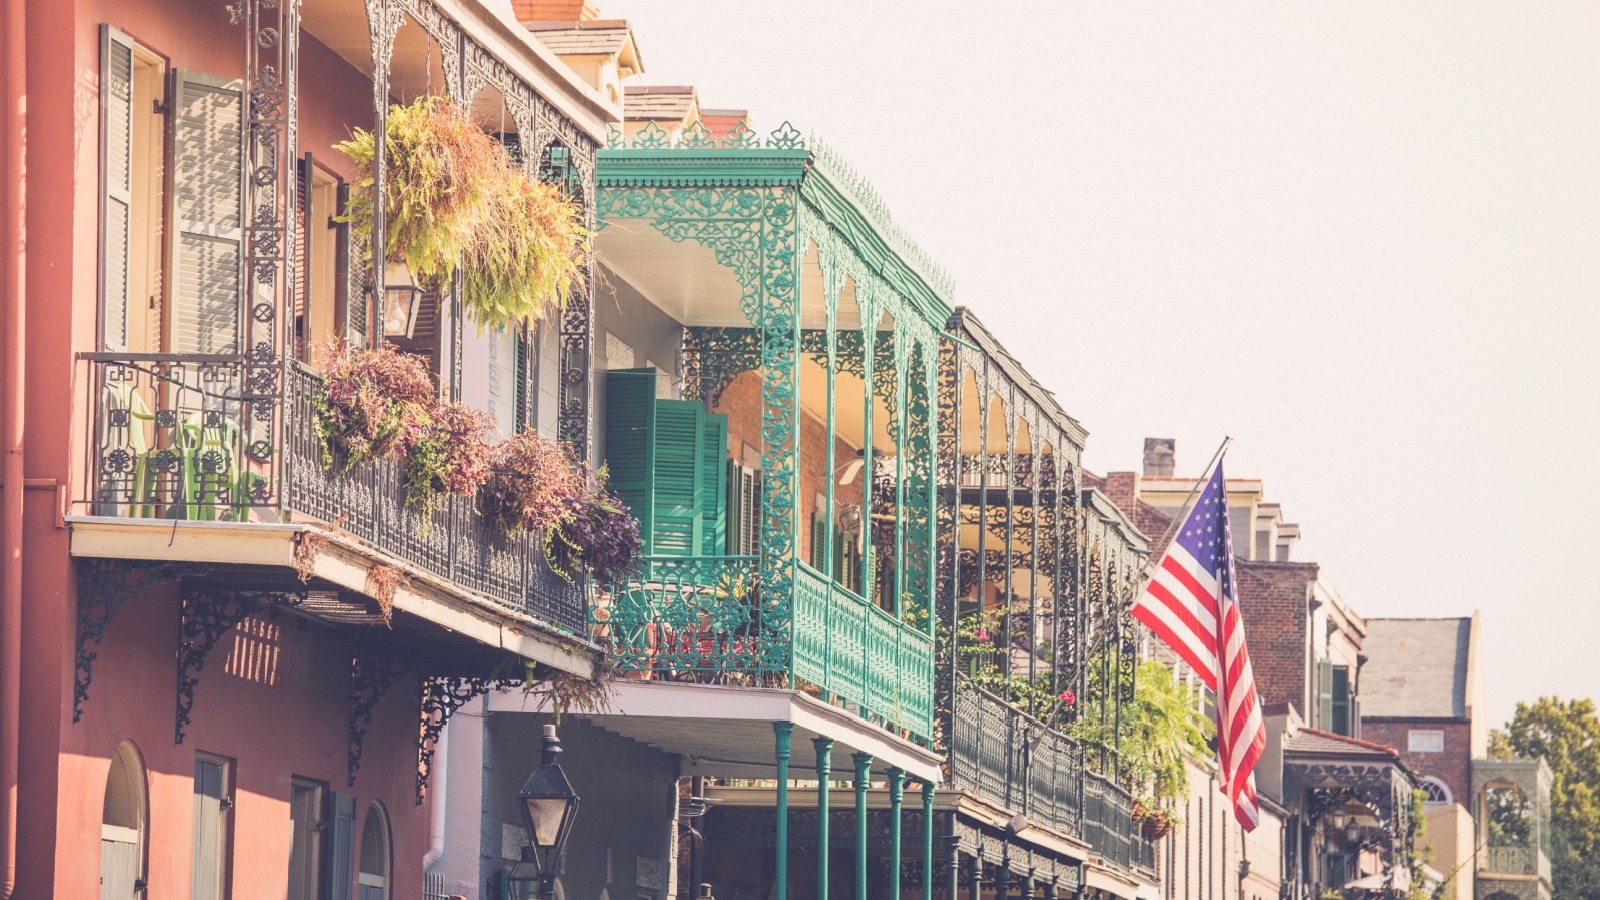 Colorful balconies line the streets in the French Quarter of New Orleans Louisiana